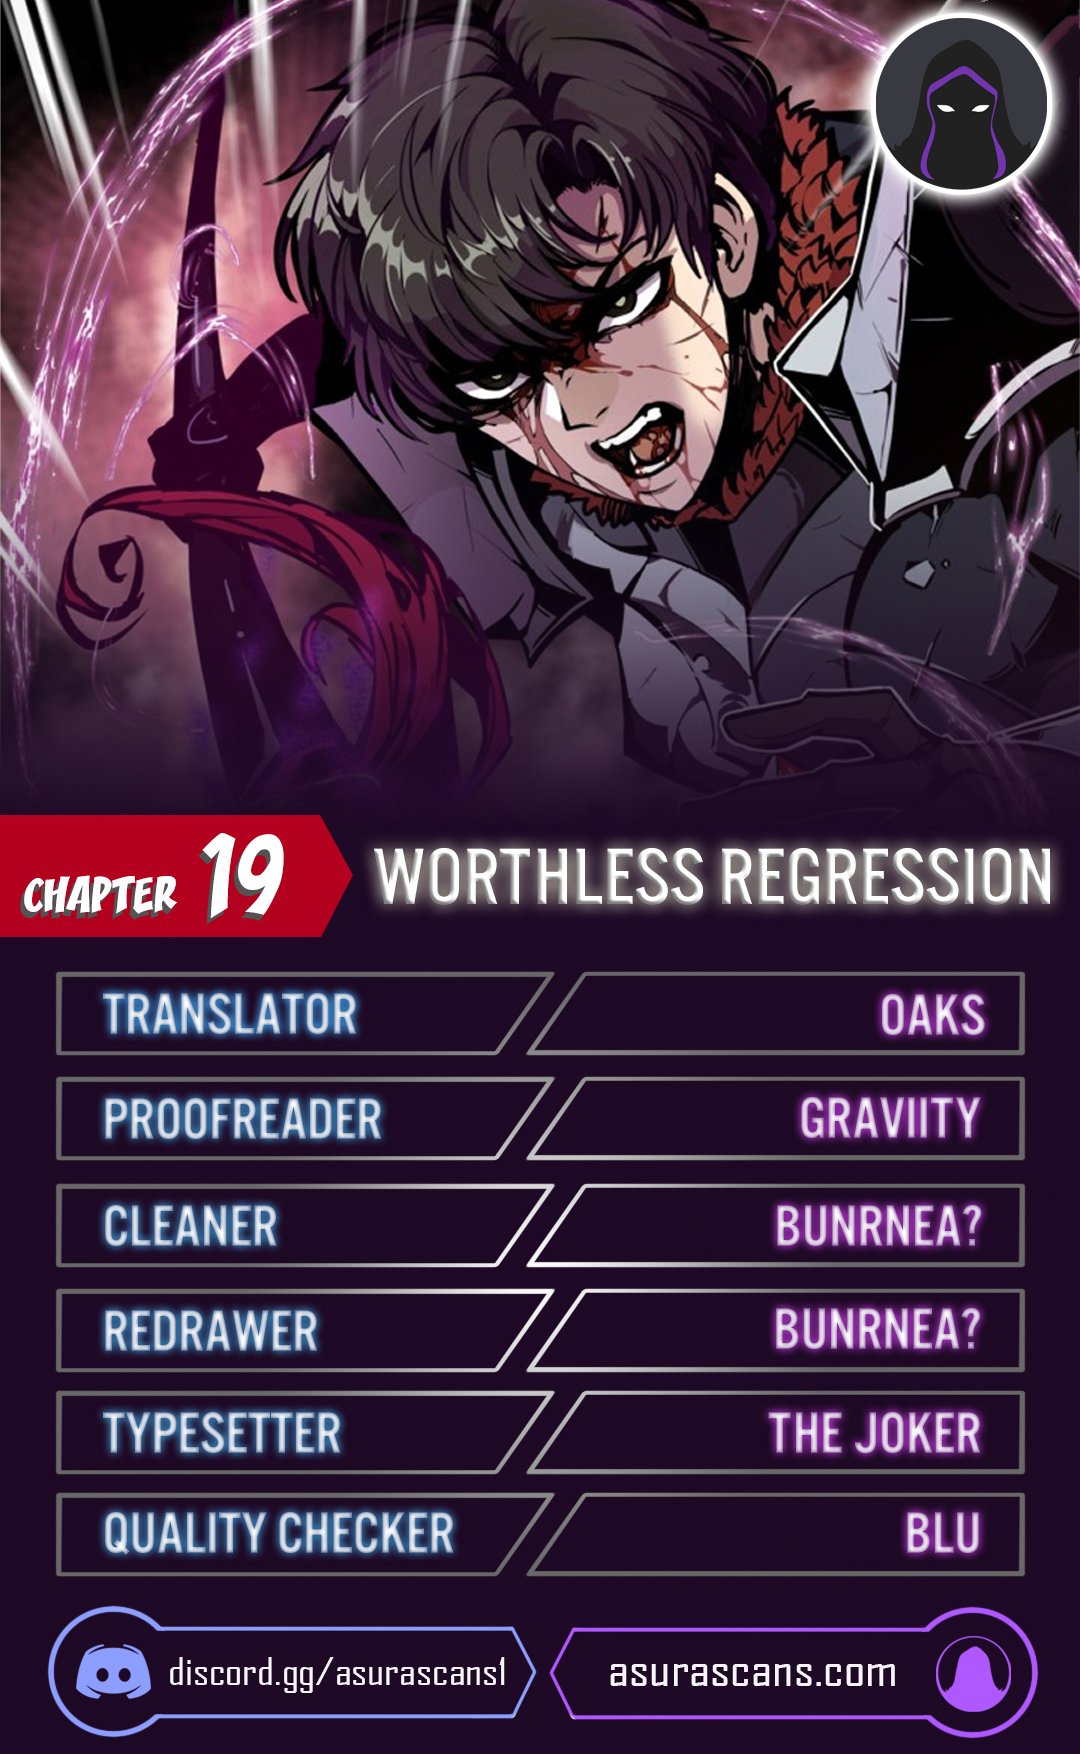 Worthless Regression - Chapter 20457 - Image 1